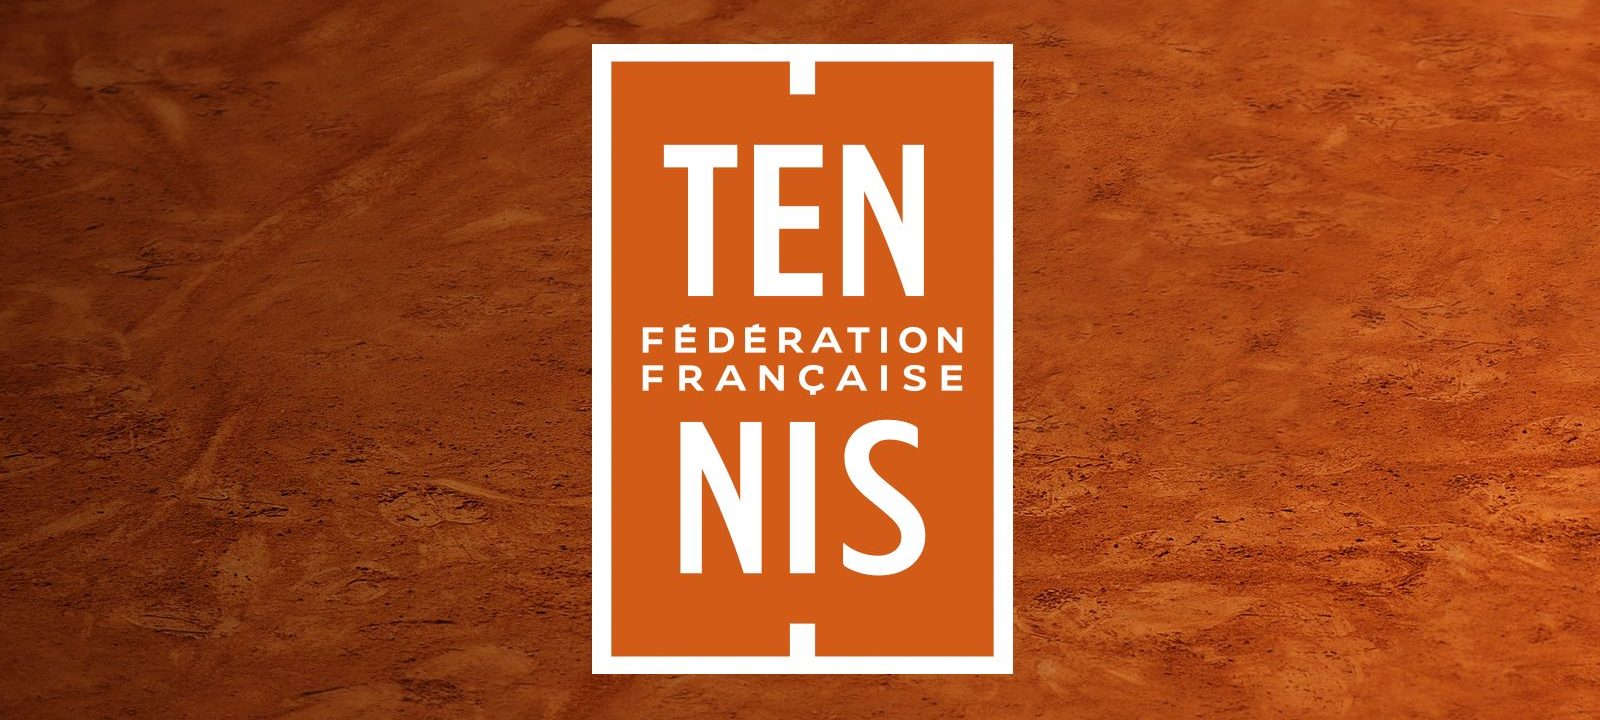 Projet_project_realisation_FFT_federation_francaise_french_tennis_ouverture2